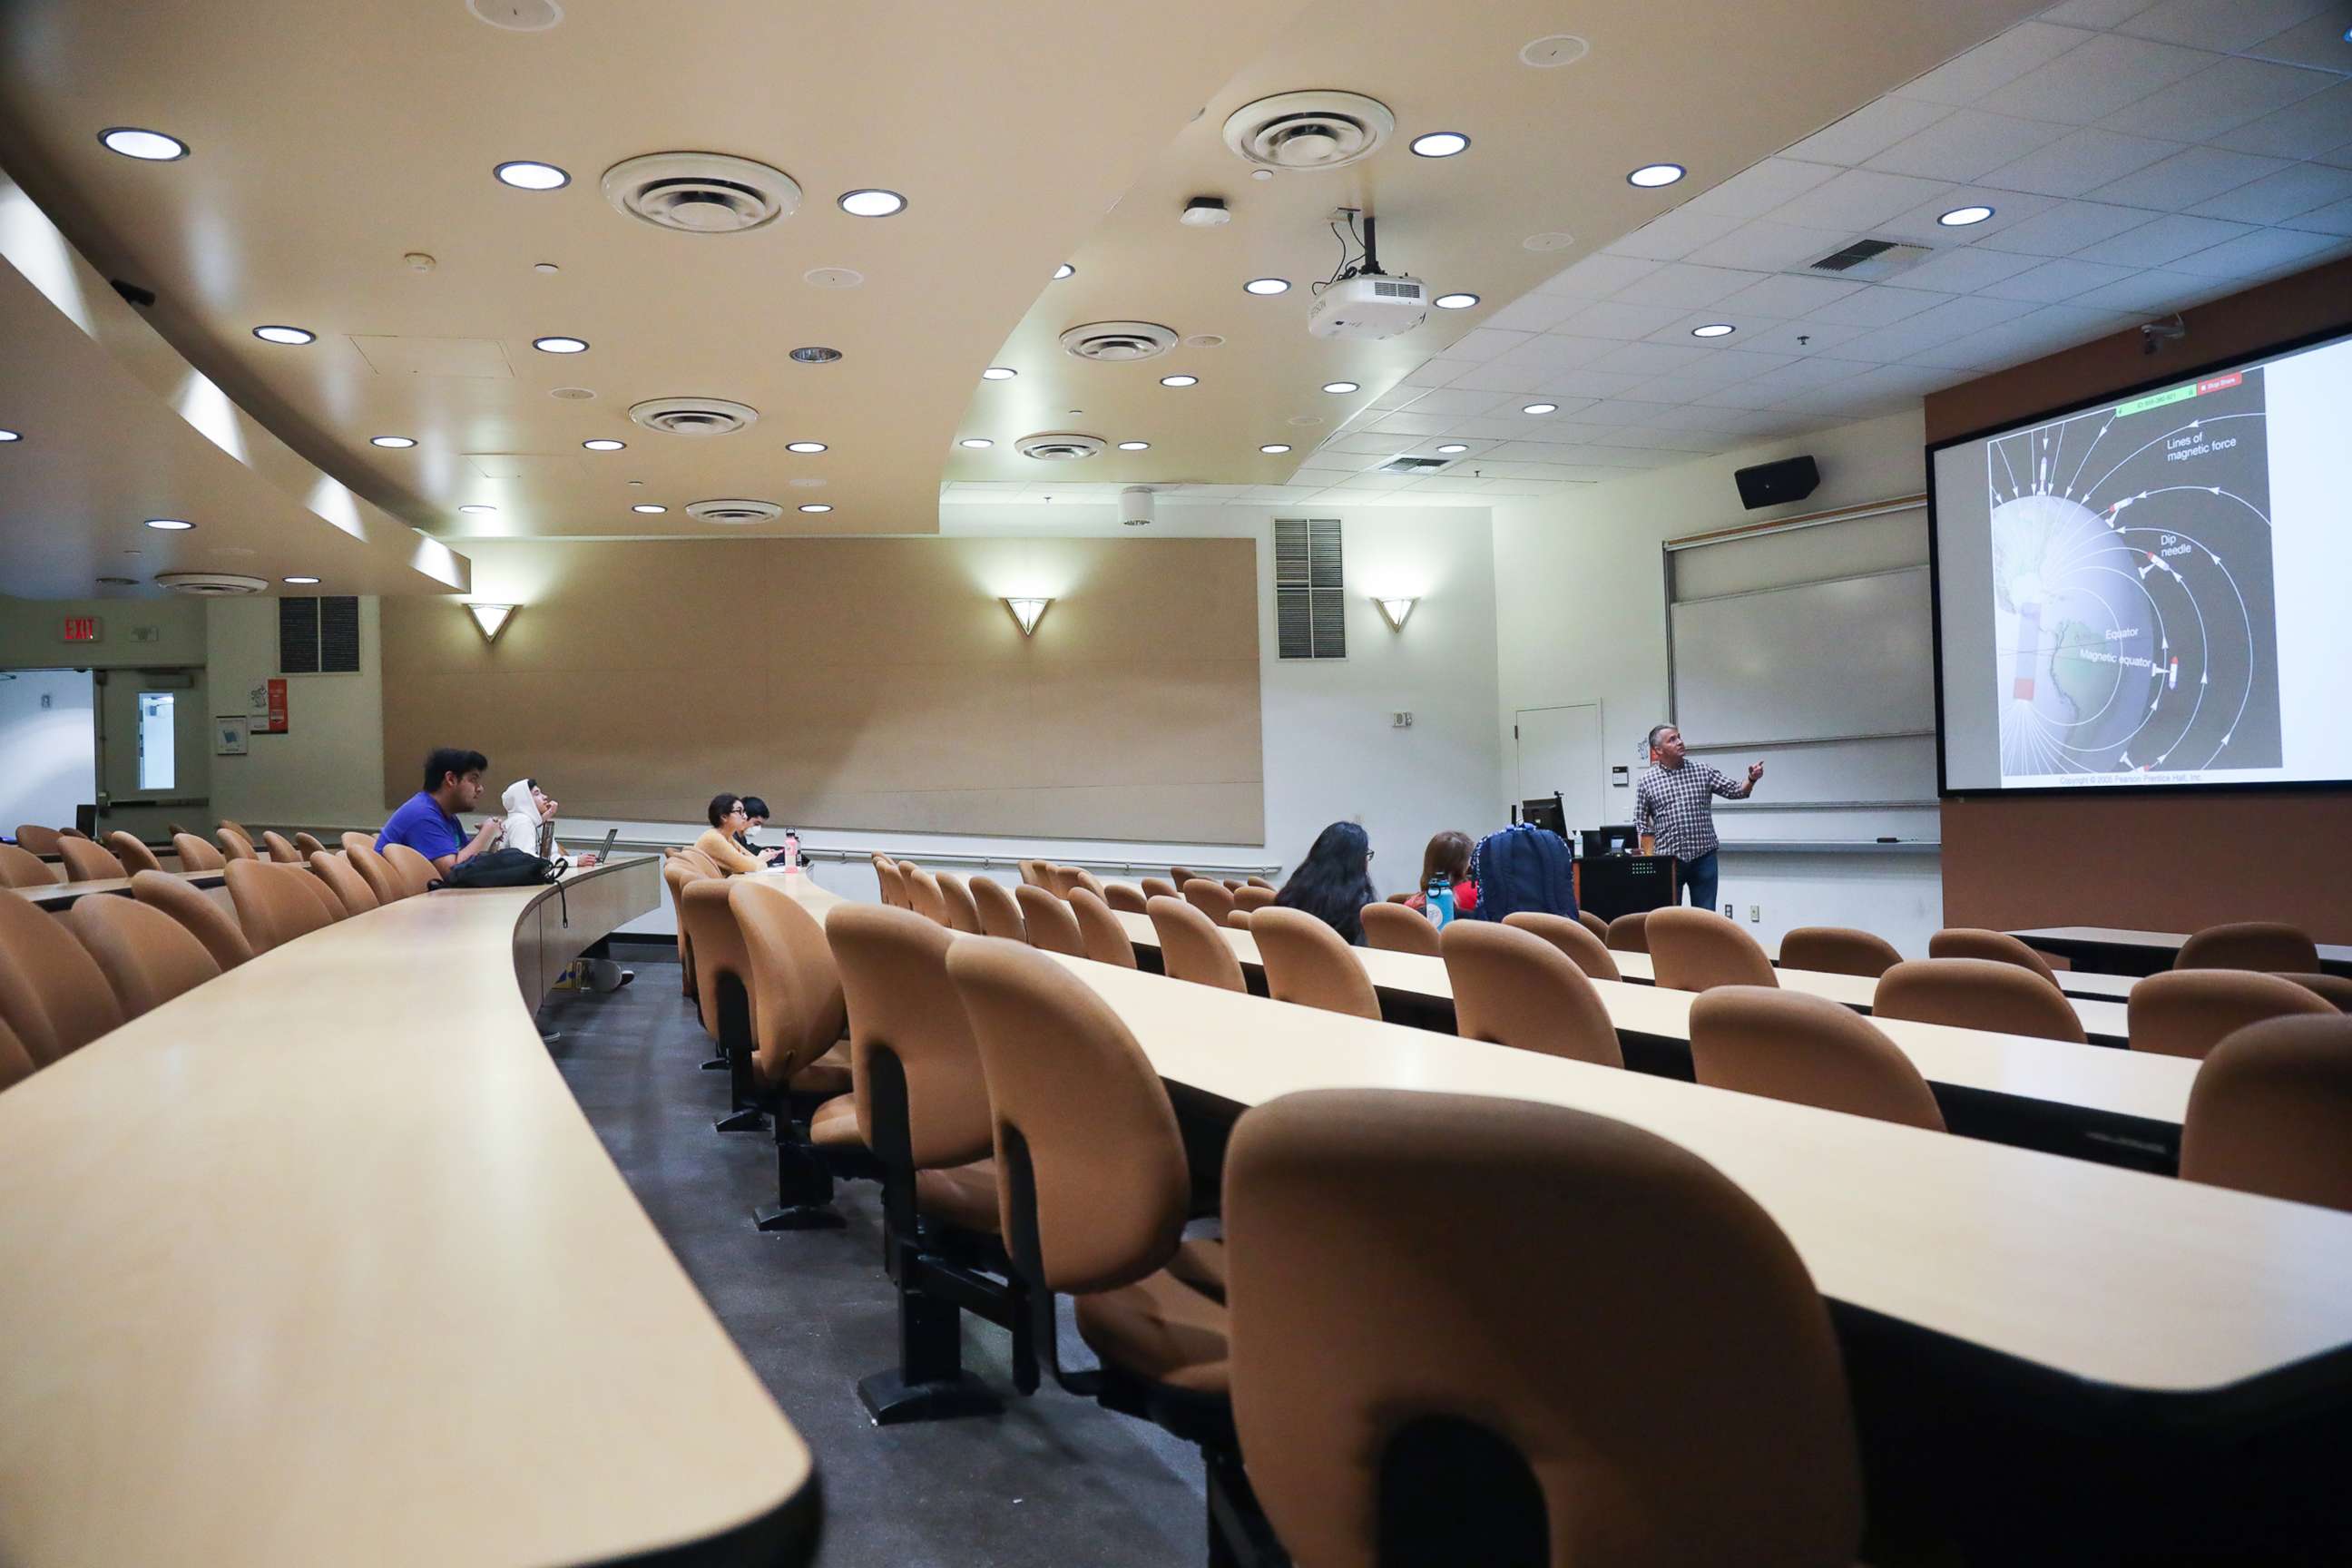 PHOTO: Professor Matthew Kirby gives a geological sciences lecture in March at Cal State Fullerton in Orange County, California. Most of the 120 students attended the class remotely, with only seven in person.